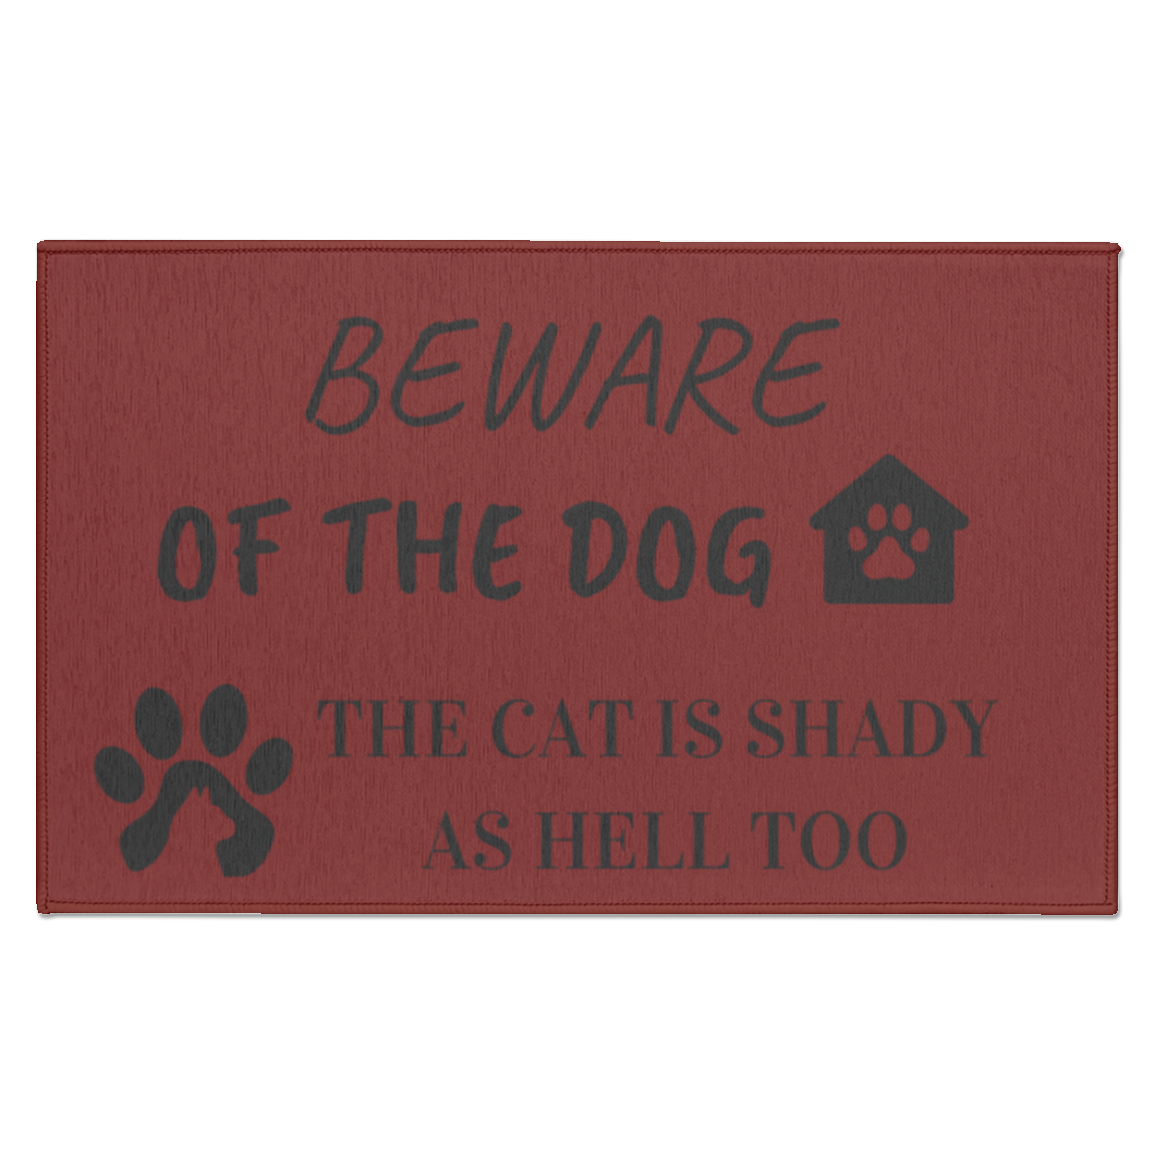 Beware of the Dog ~ Cat is Shady too... Indoor Doormat/ Non-Skid/ Entry rug